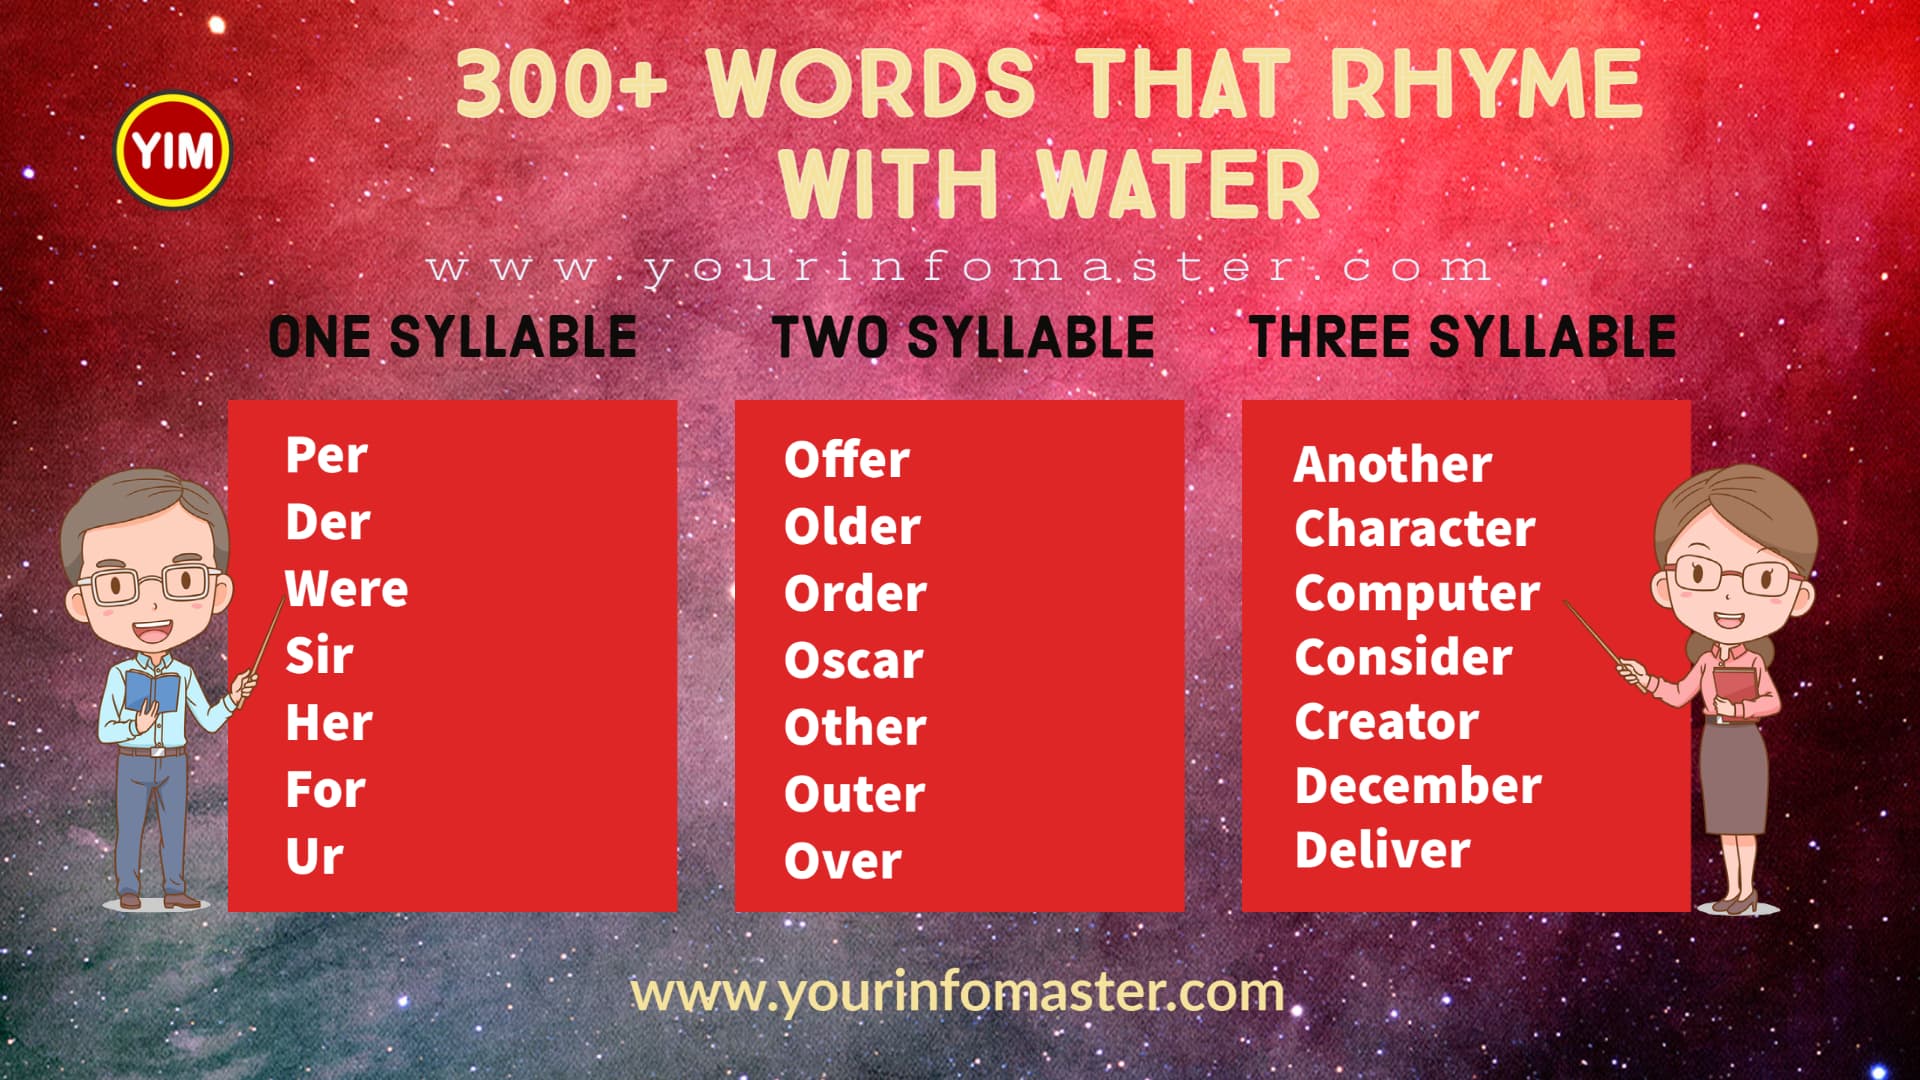 100 rhyming words, 1000 rhyming words, 200+ Interesting Words, 200+ Useful Words, 300 rhyming words list, 50 rhyming words list, 500 rhyming words, all words that rhyme with Water, Another word for Water, are rhyming words, how to teach rhyming words, Interesting Words that Rhyme in English, Printable Infographics, Printable Worksheets, rhymes English words, rhymes with Water infographics, rhyming pairs, Rhyming Words, Rhyming Words for Kids, rhyming words for Water, Rhyming Words List, Things that rhyme with Water, Water rhyme, Water rhyme examples, Water Rhyming words, what are rhyming words, what rhymes with Water, words rhyming with Water, Words that Rhyme, Words That Rhyme with Water